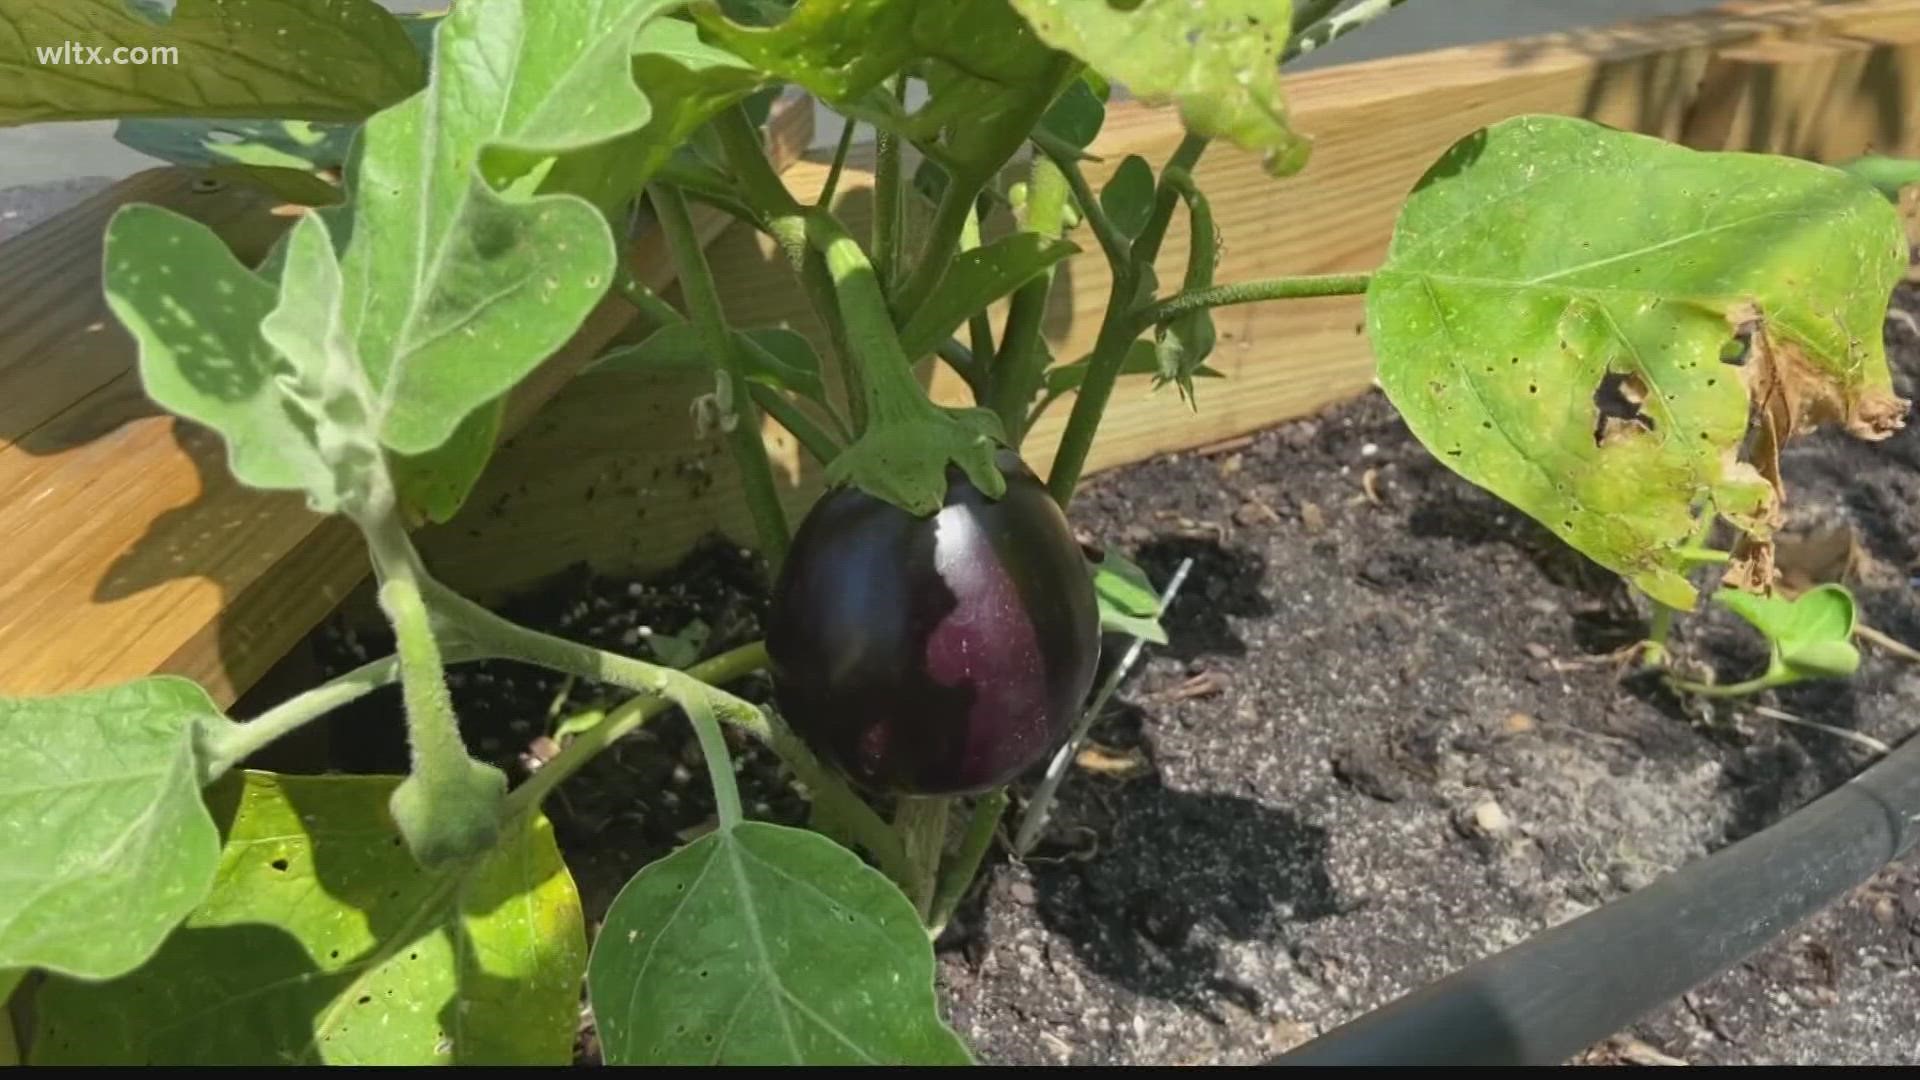 United Way of Kershaw County has seen growth in their gardens, helping produce tomatoes, zucchini, and more to help feed people in need.